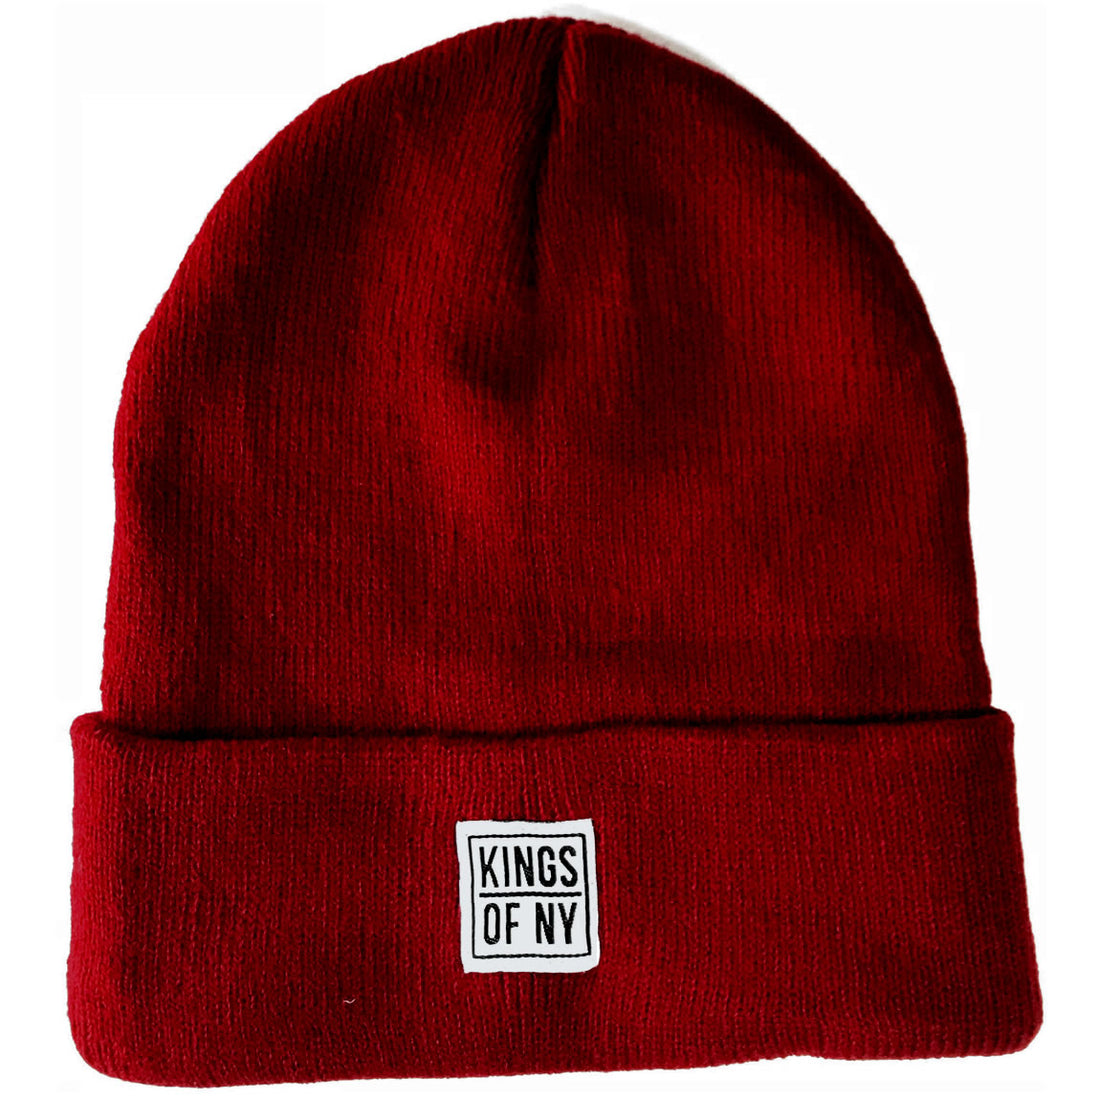 Burgundy Beanie Hat by Kings Of NY